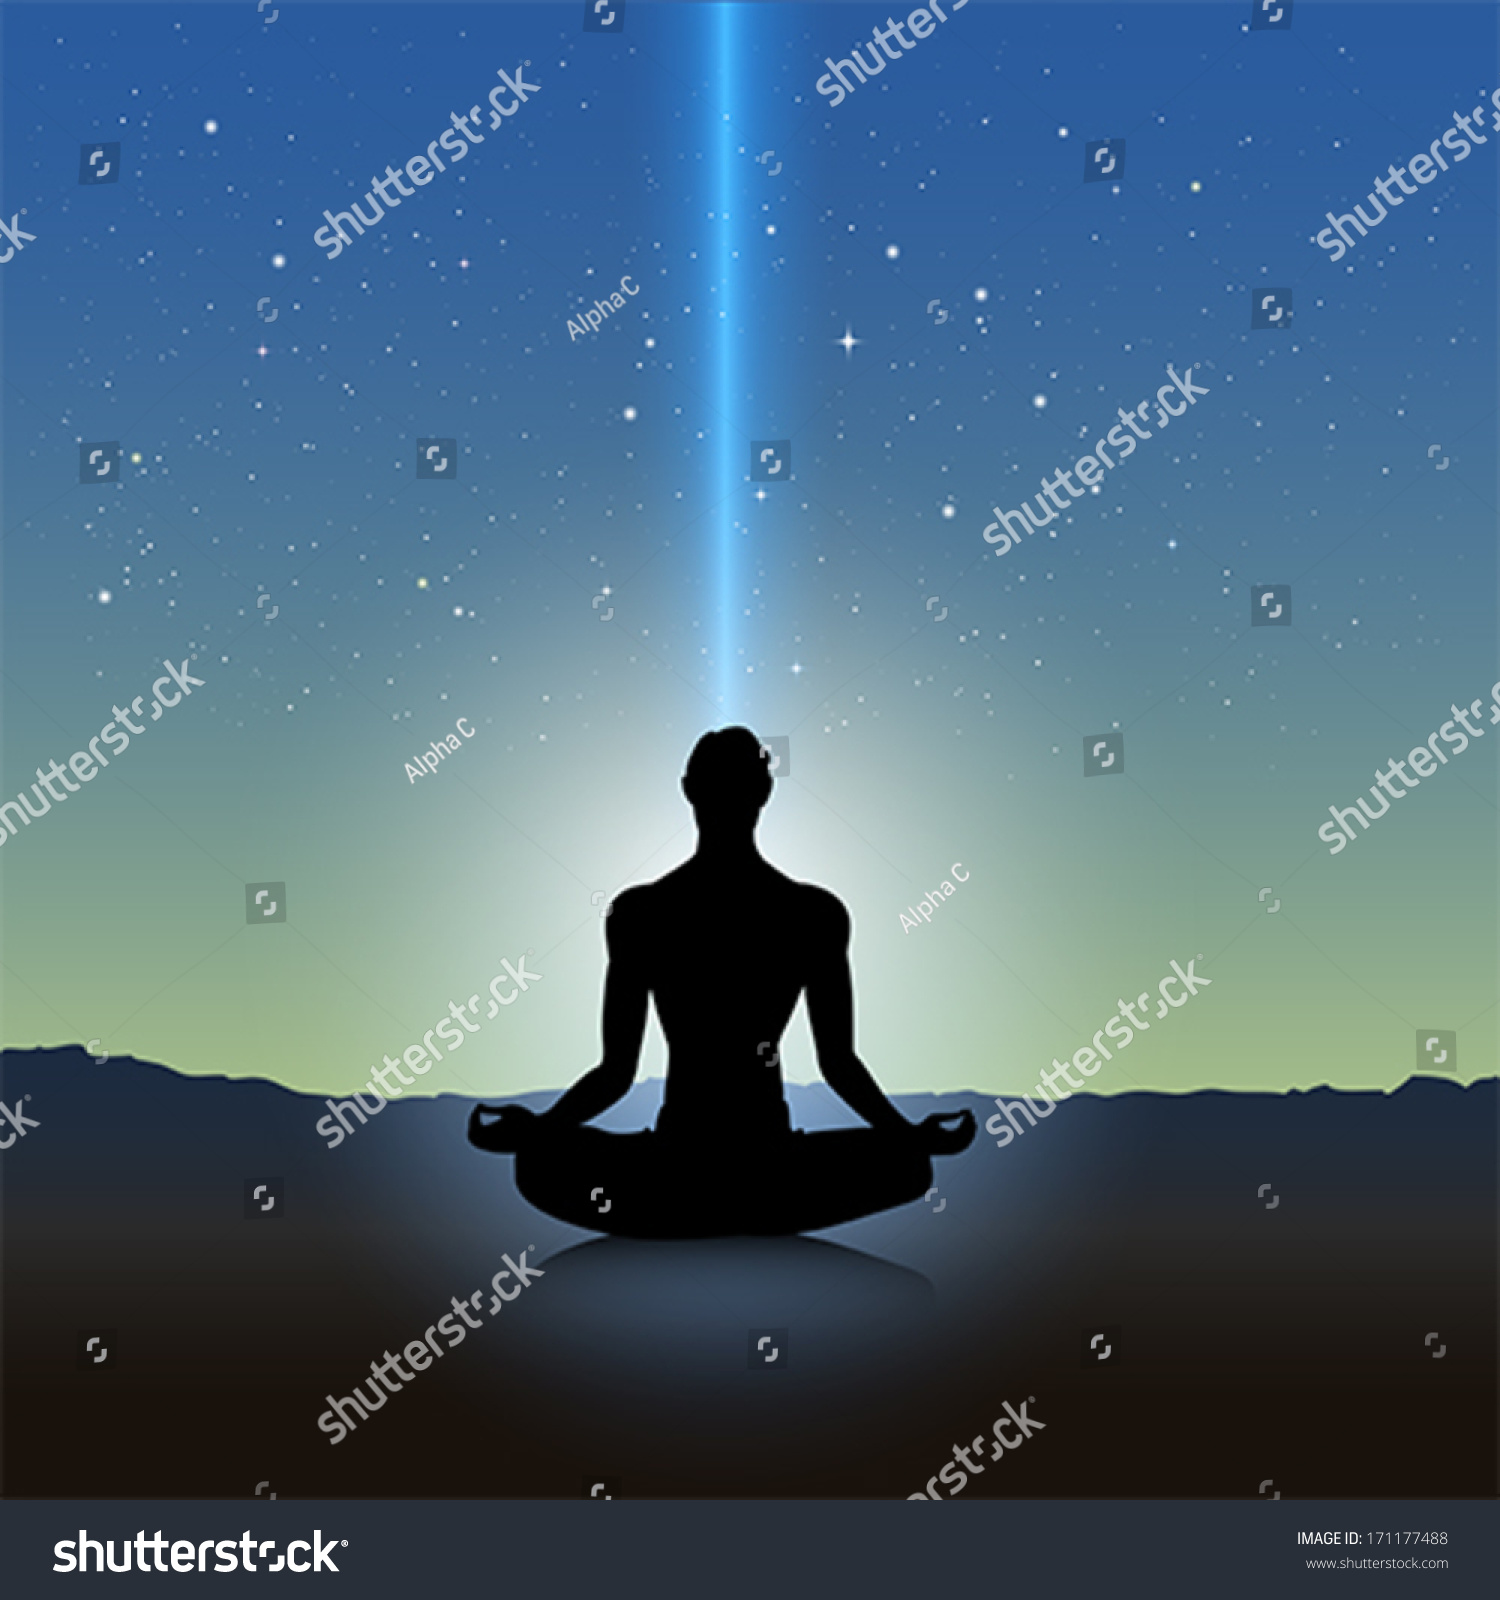 Male Silhouette Meditation Pose On Landscape Stock Vector (Royalty Free ...